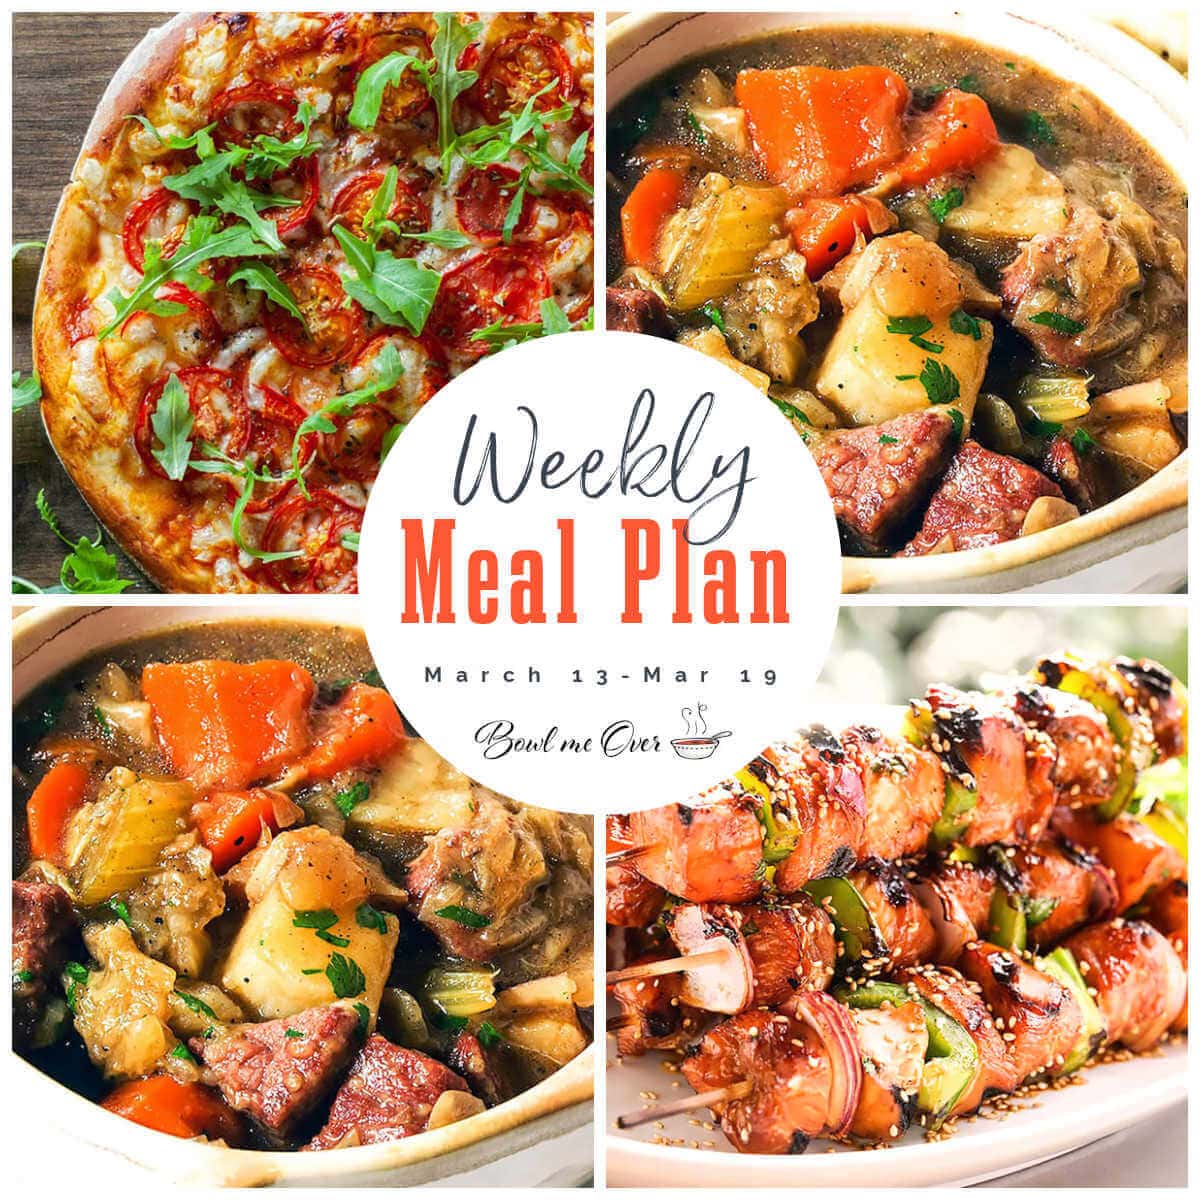 Weekly Meal Plan 11 recipes with print overlay. 